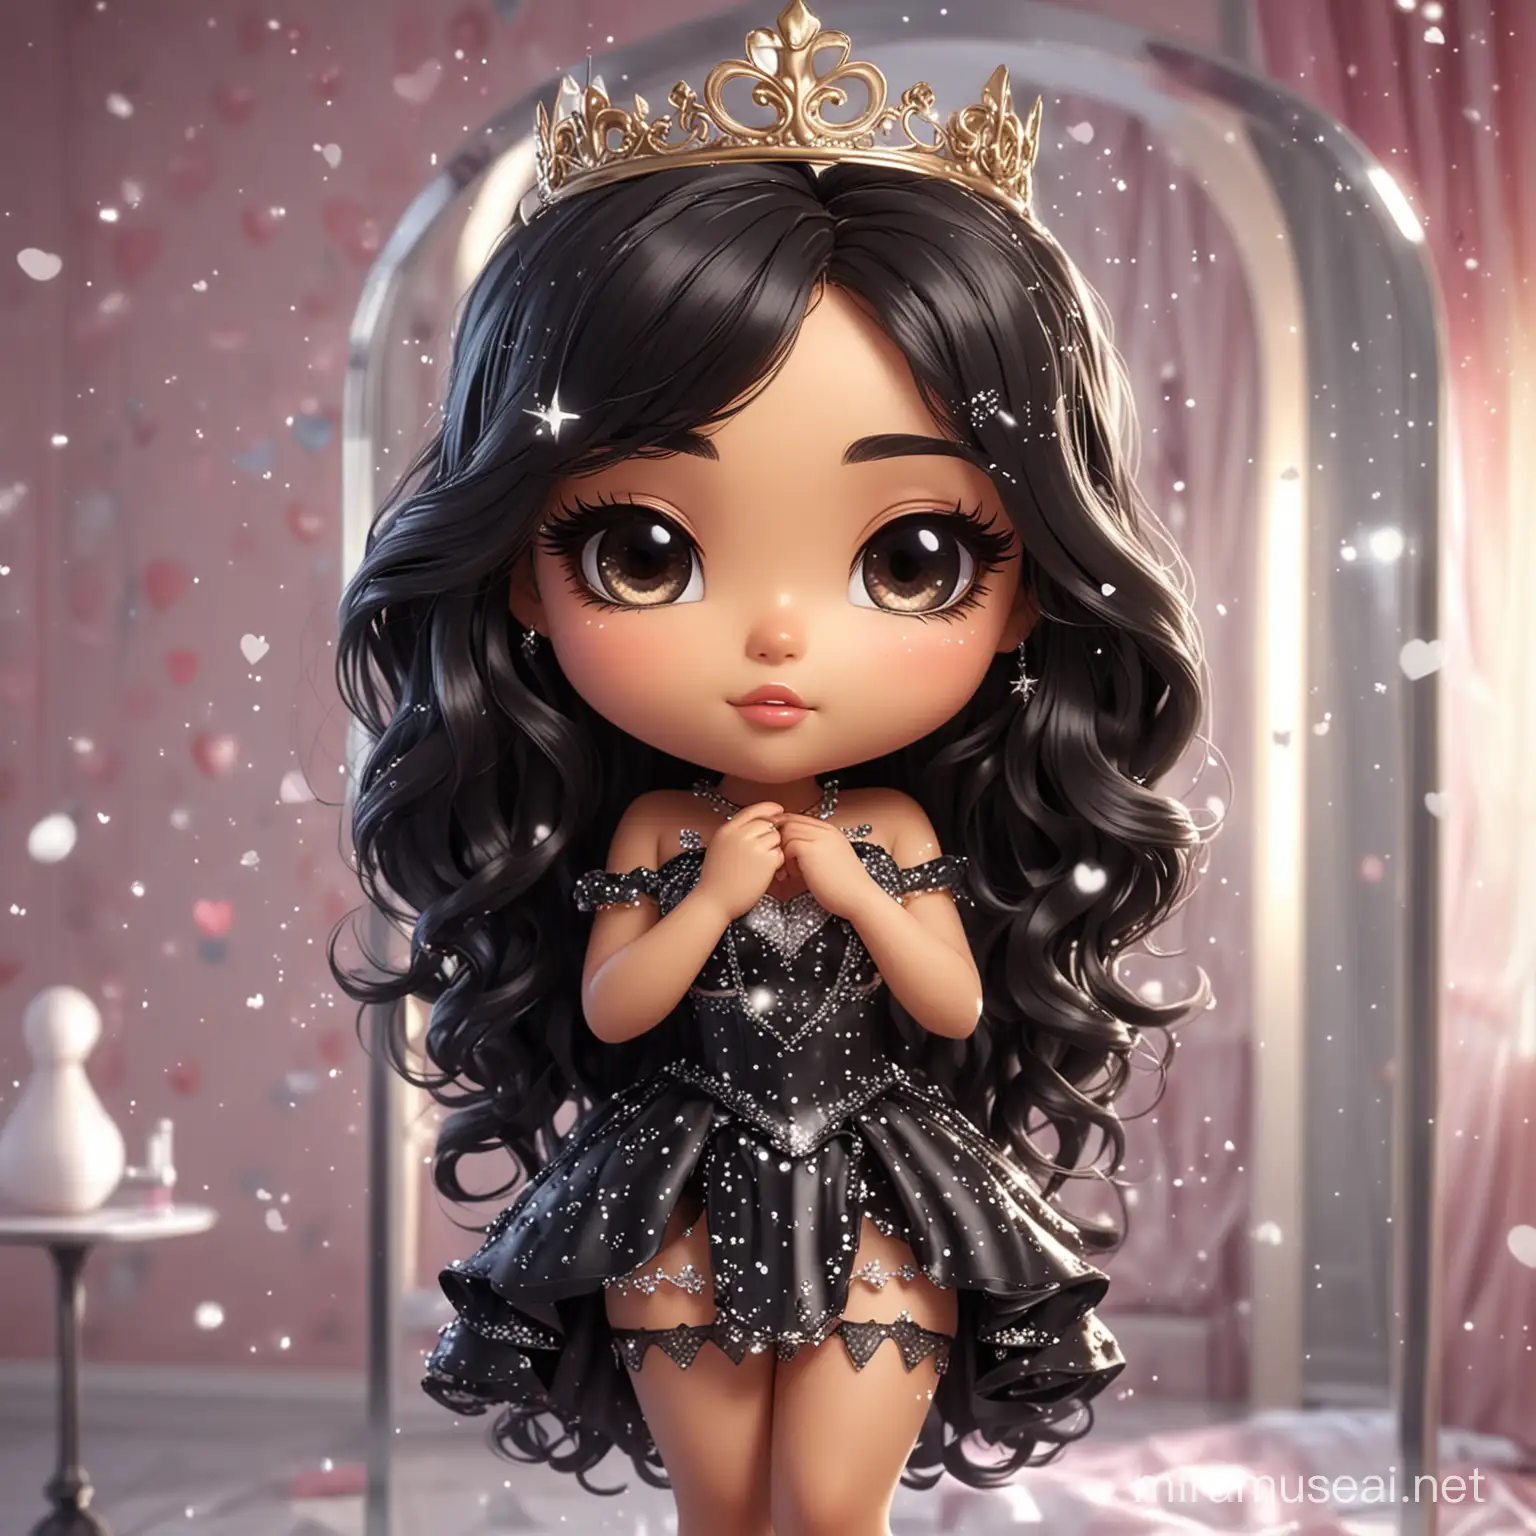 Latina chibi female wearing immaculate makeup in a gorgeous sexy dress with split. Her wavy, long, black hair has highlights. She's looking into a mirror and her reflection has a crown on background with sparkling hearts